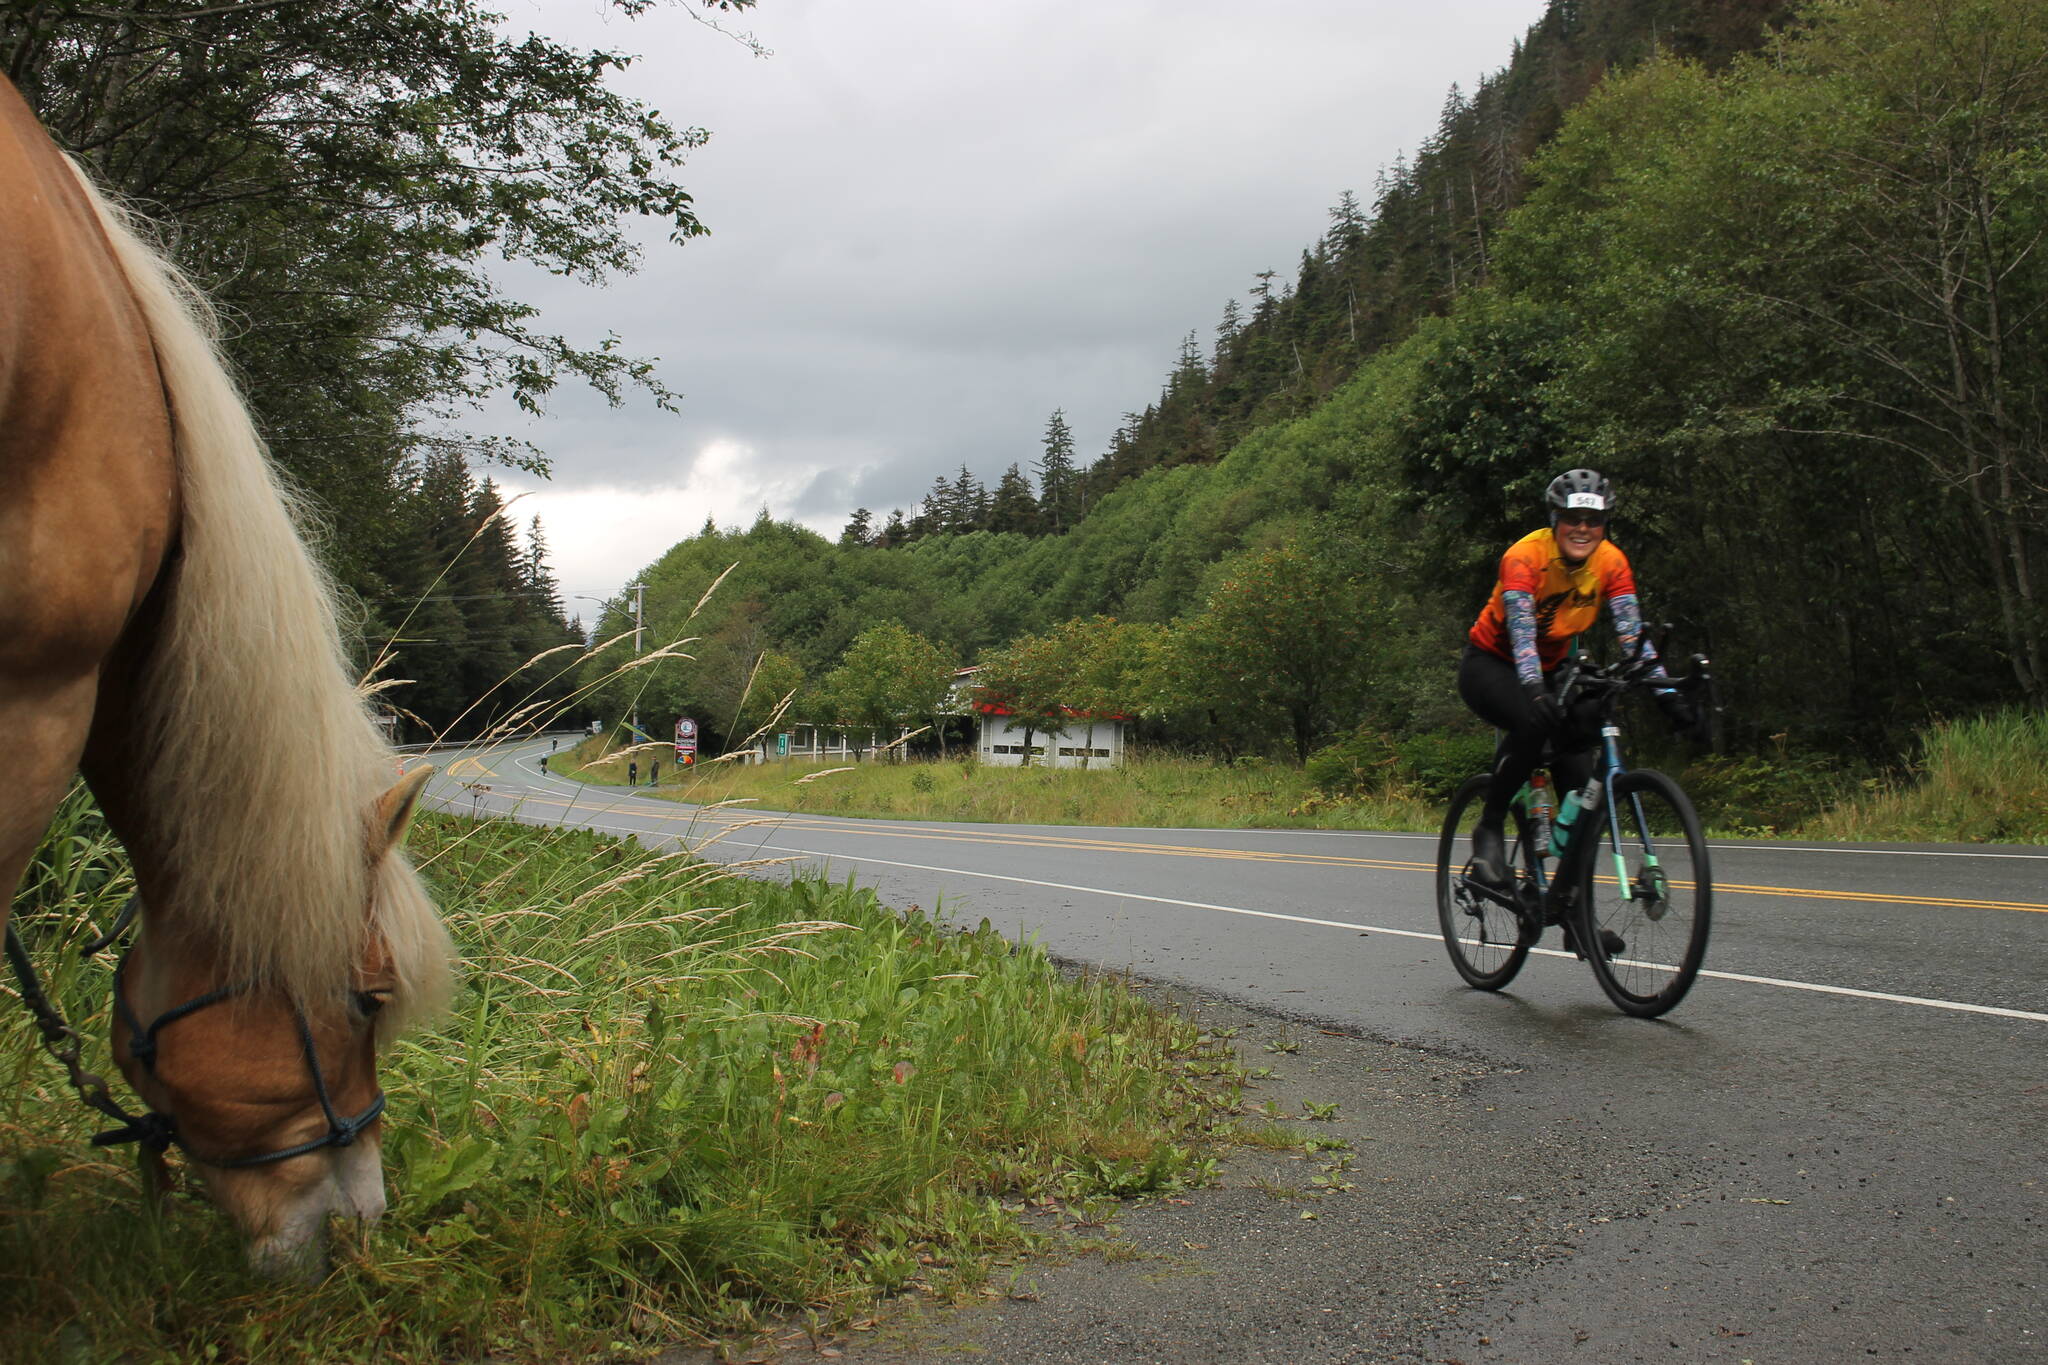 Mr. Higgins, a large pony at Ridge Stables LLC owned by Chava Lee, munches on some grass as a smiling biker passes by. (Clarise Larson/ Juneau Empire)